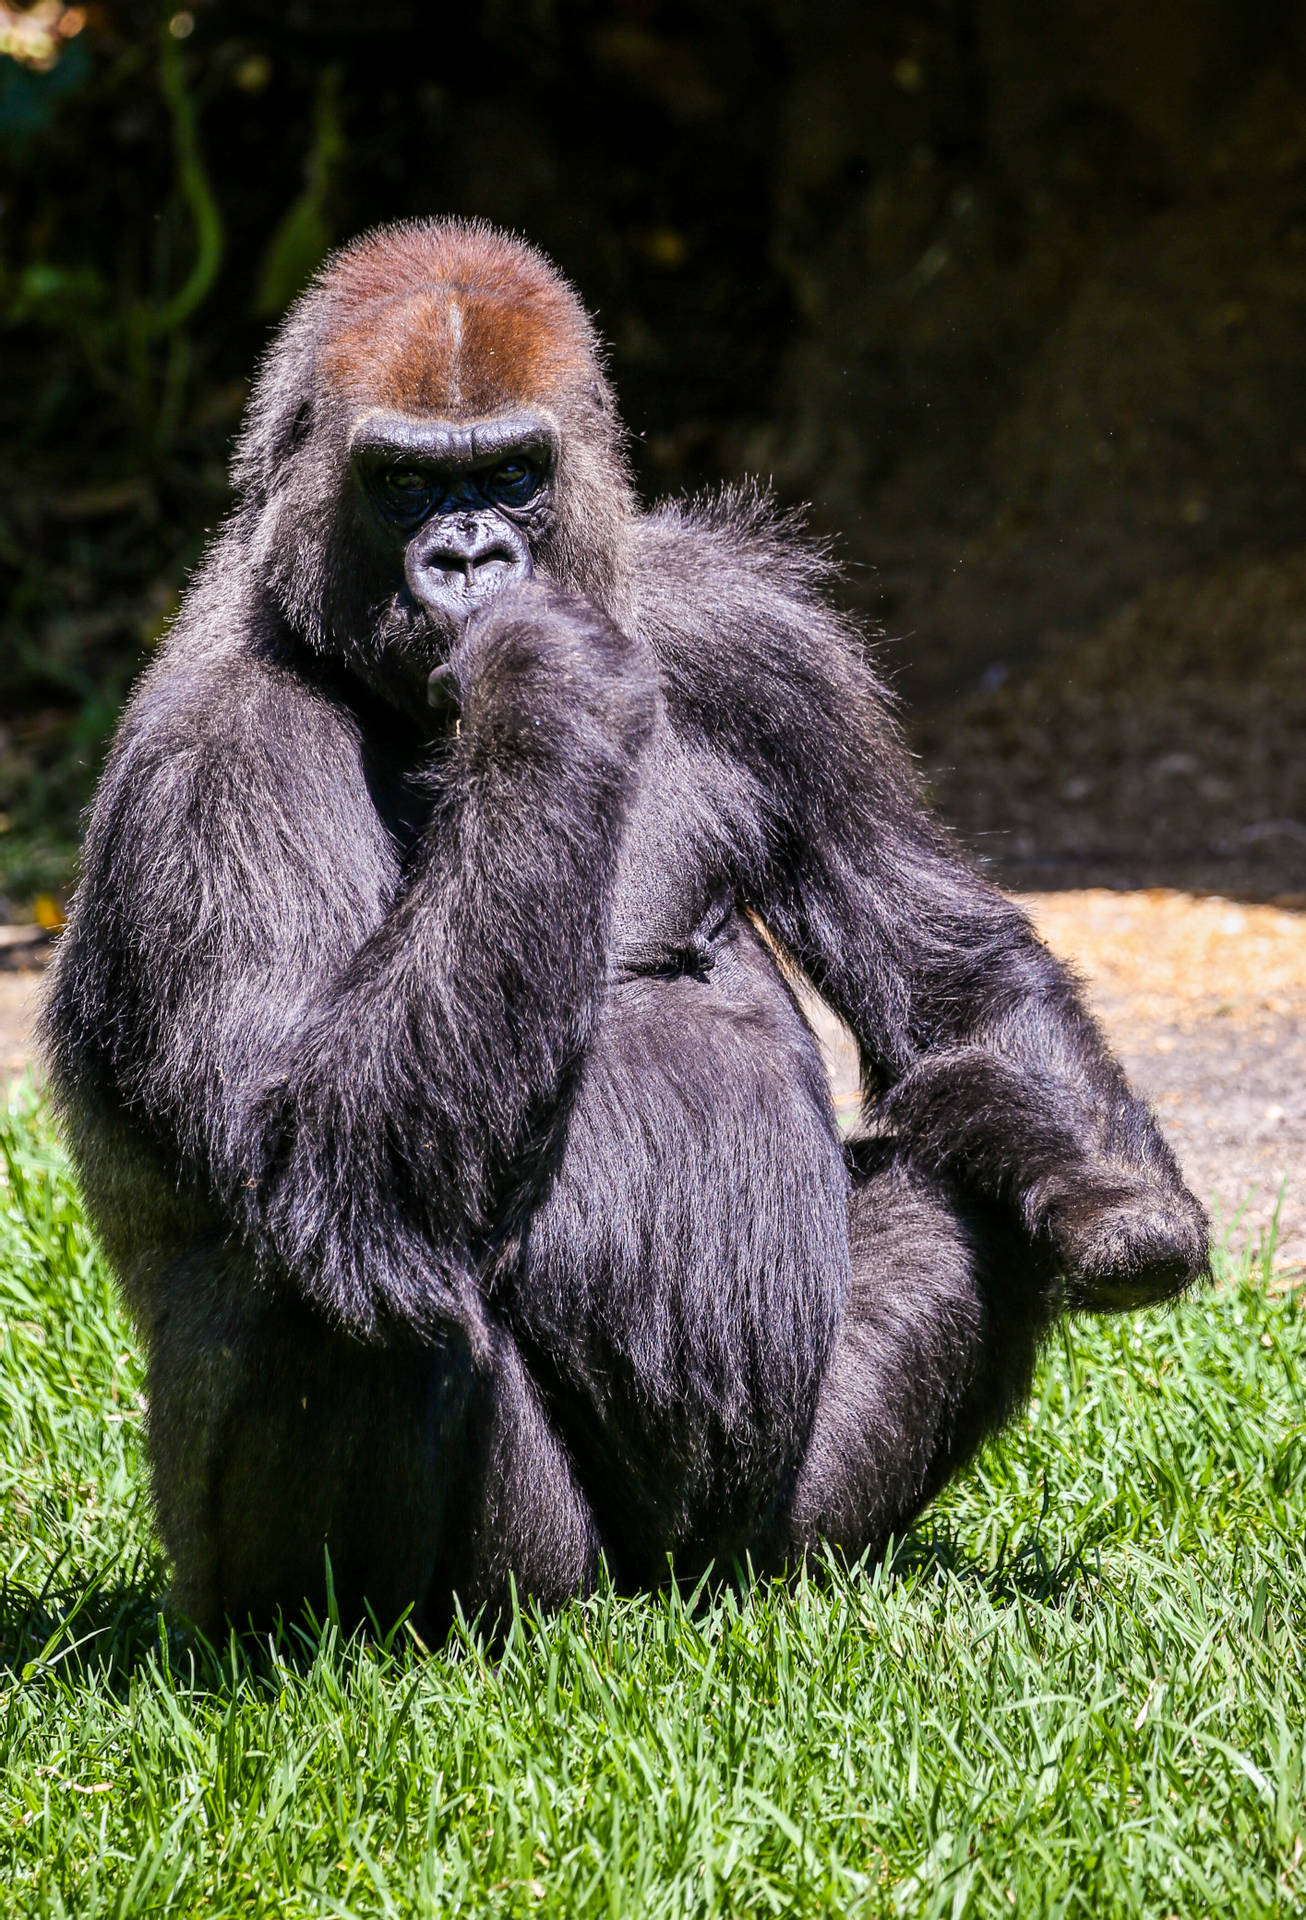 Gorilla 2830X4159 Wallpaper and Background Image